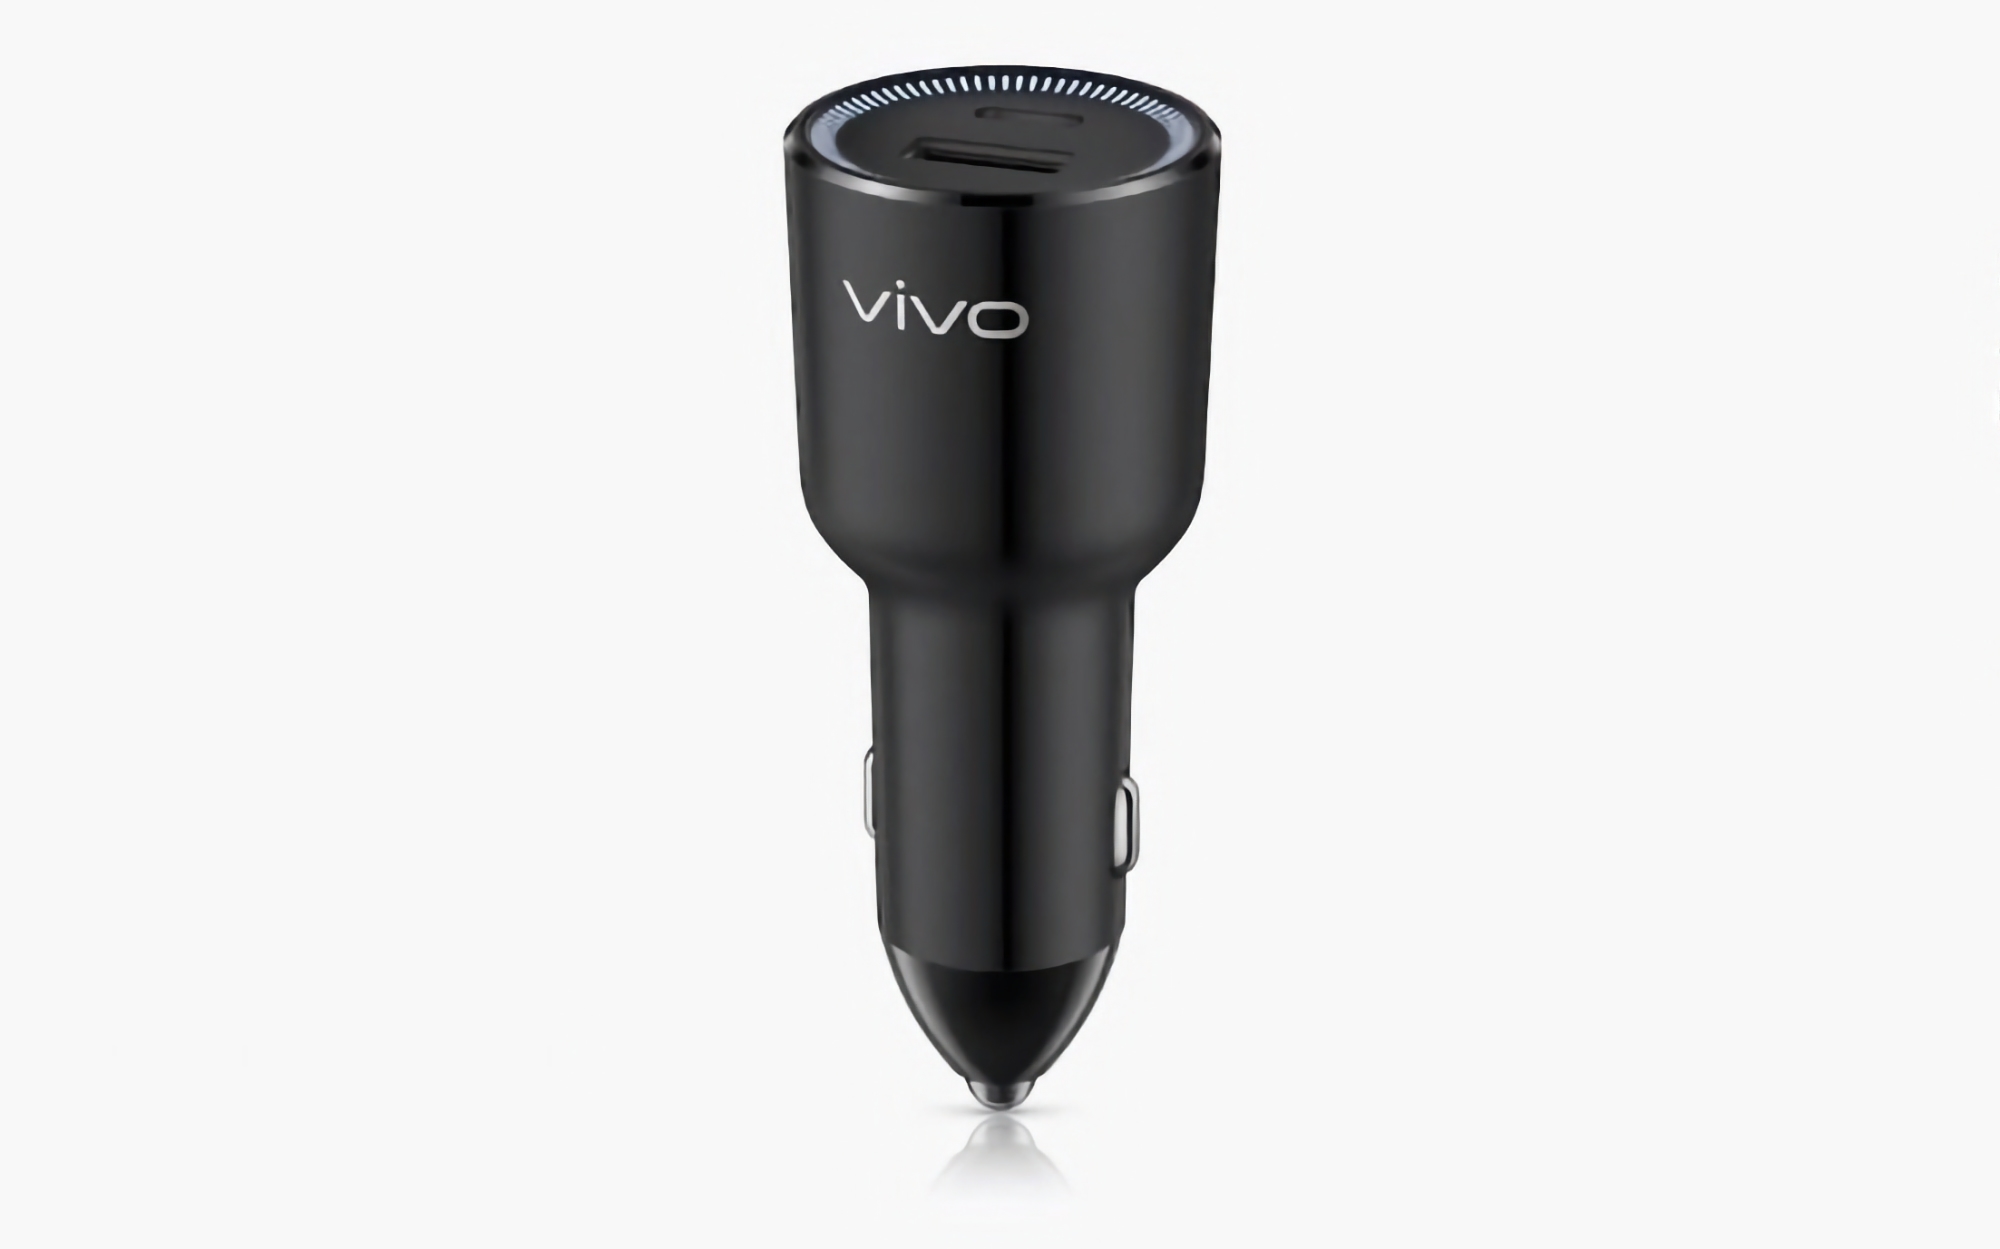 vivo unveils 80W car charger with two ports for $26